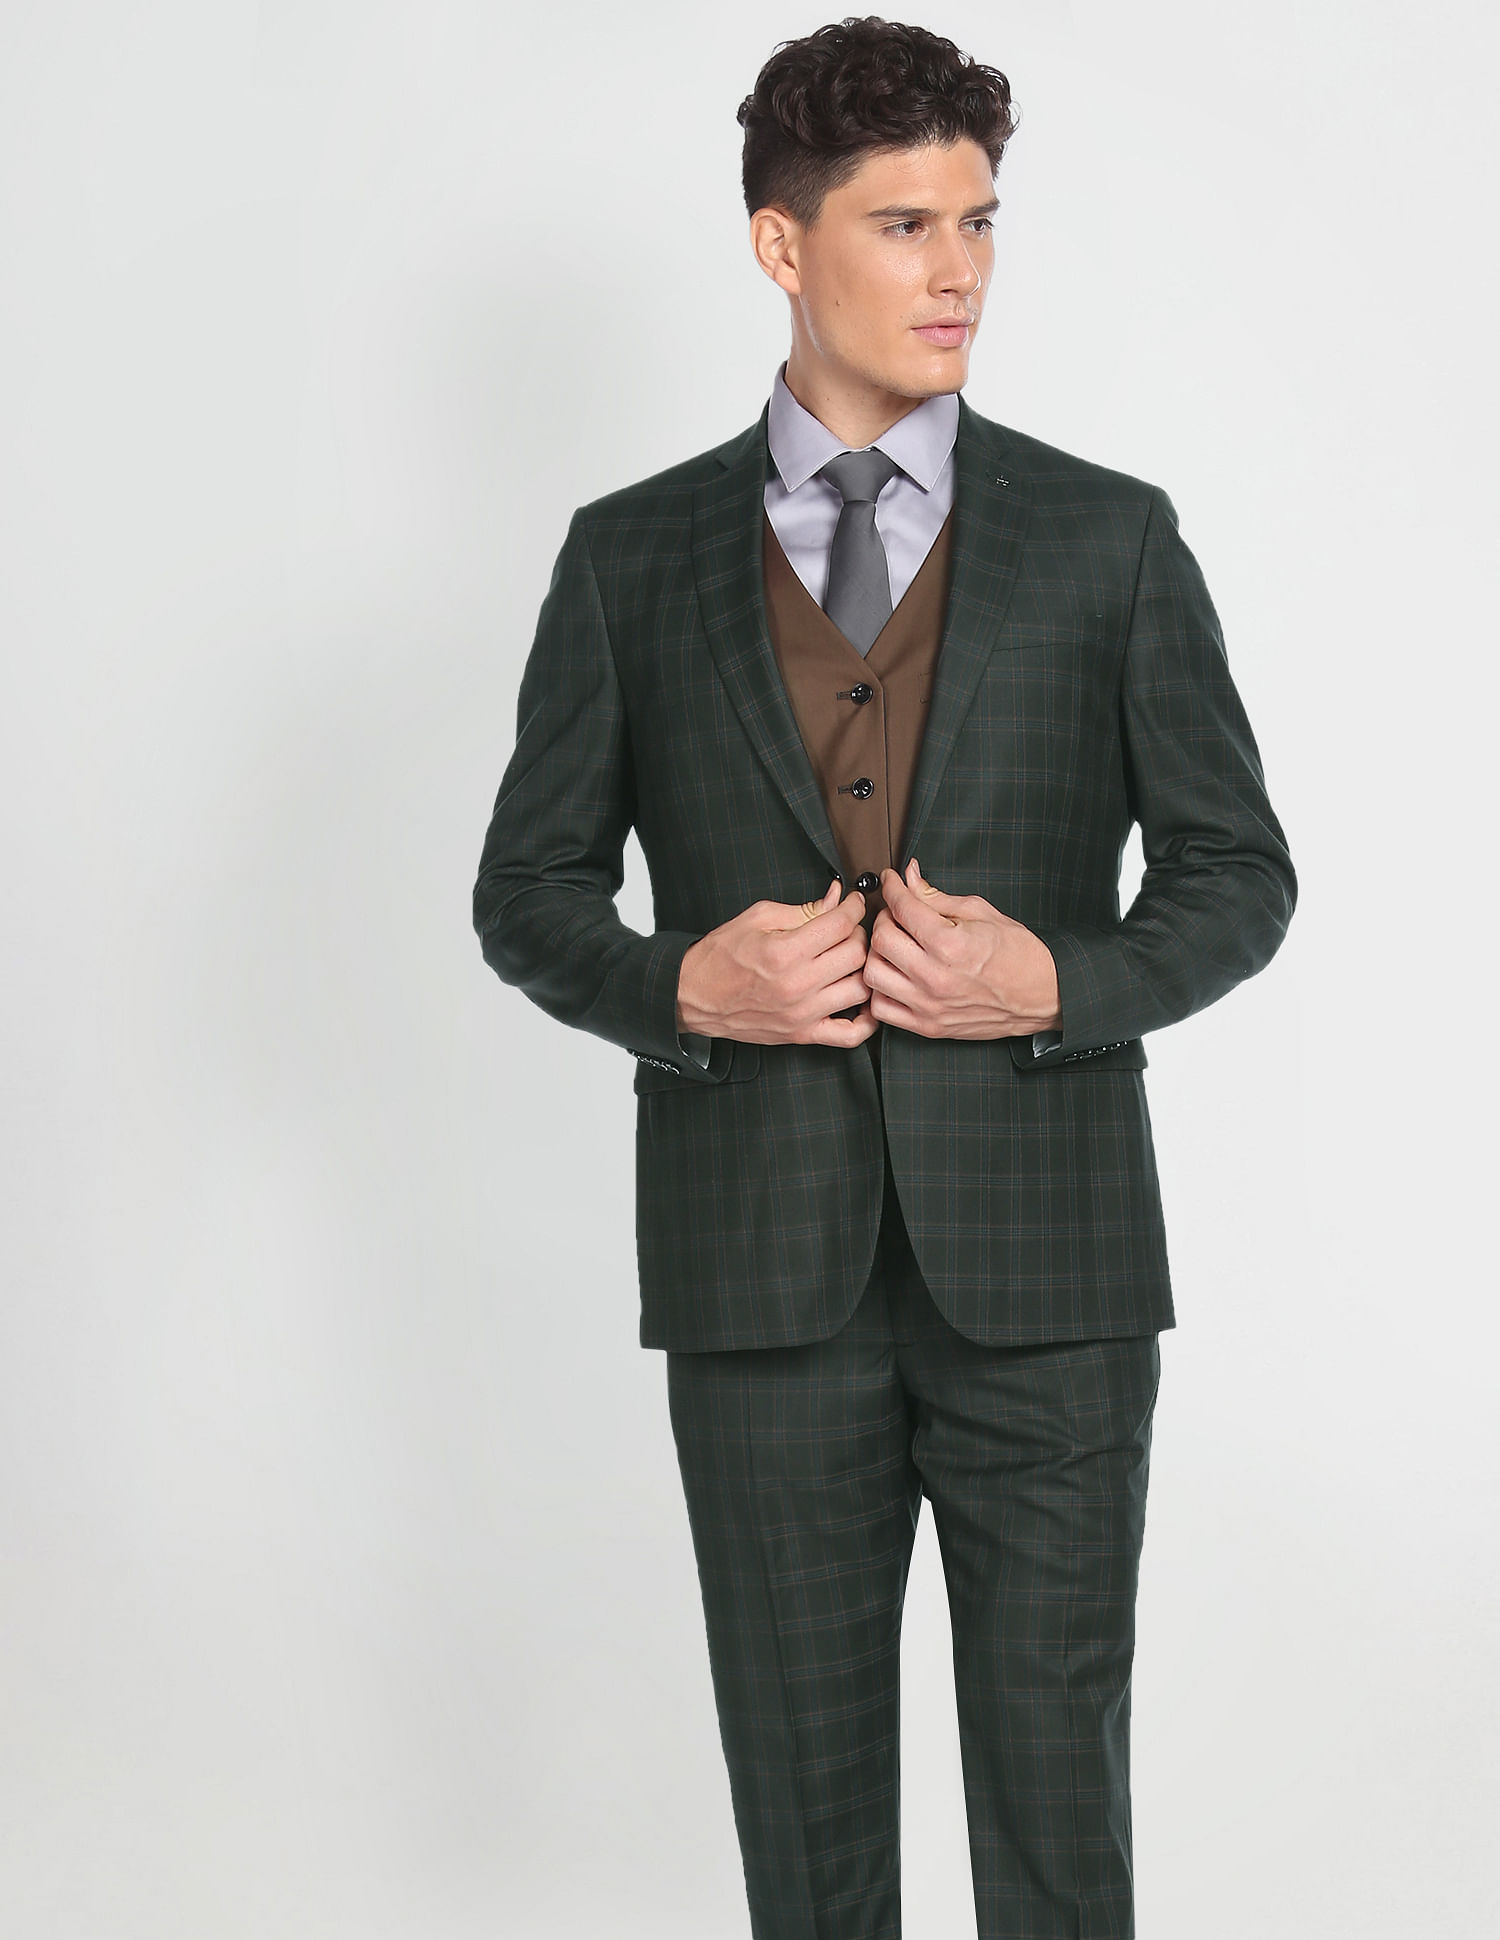 Slim fit navy blue suit with grey waistcoat